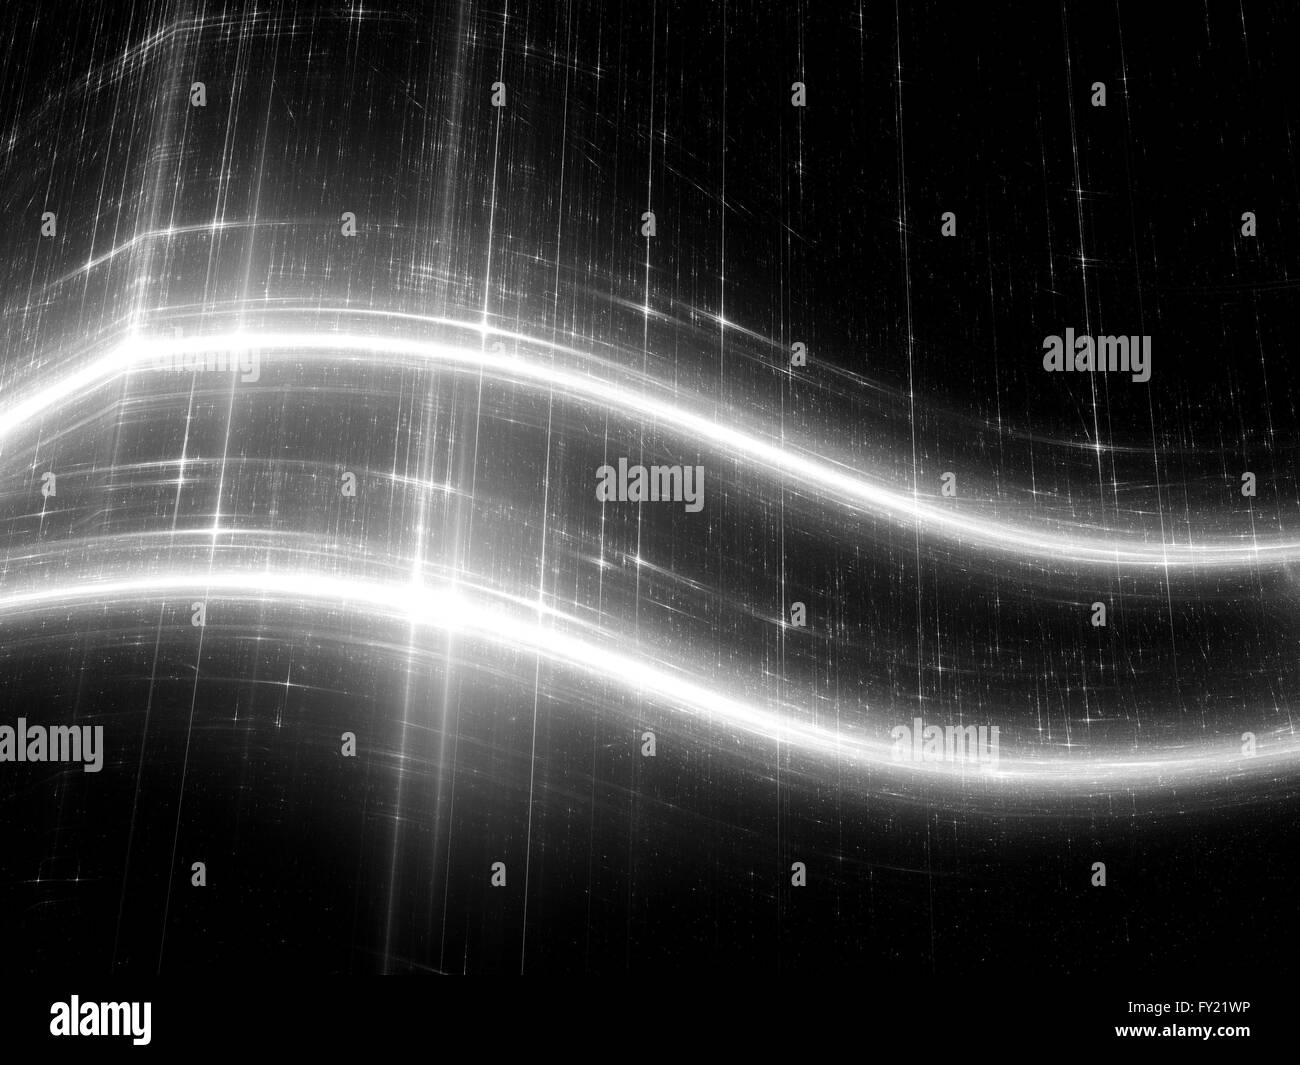 New computer technology curves, computer generated abstract intensity map, screen or overlay Stock Photo